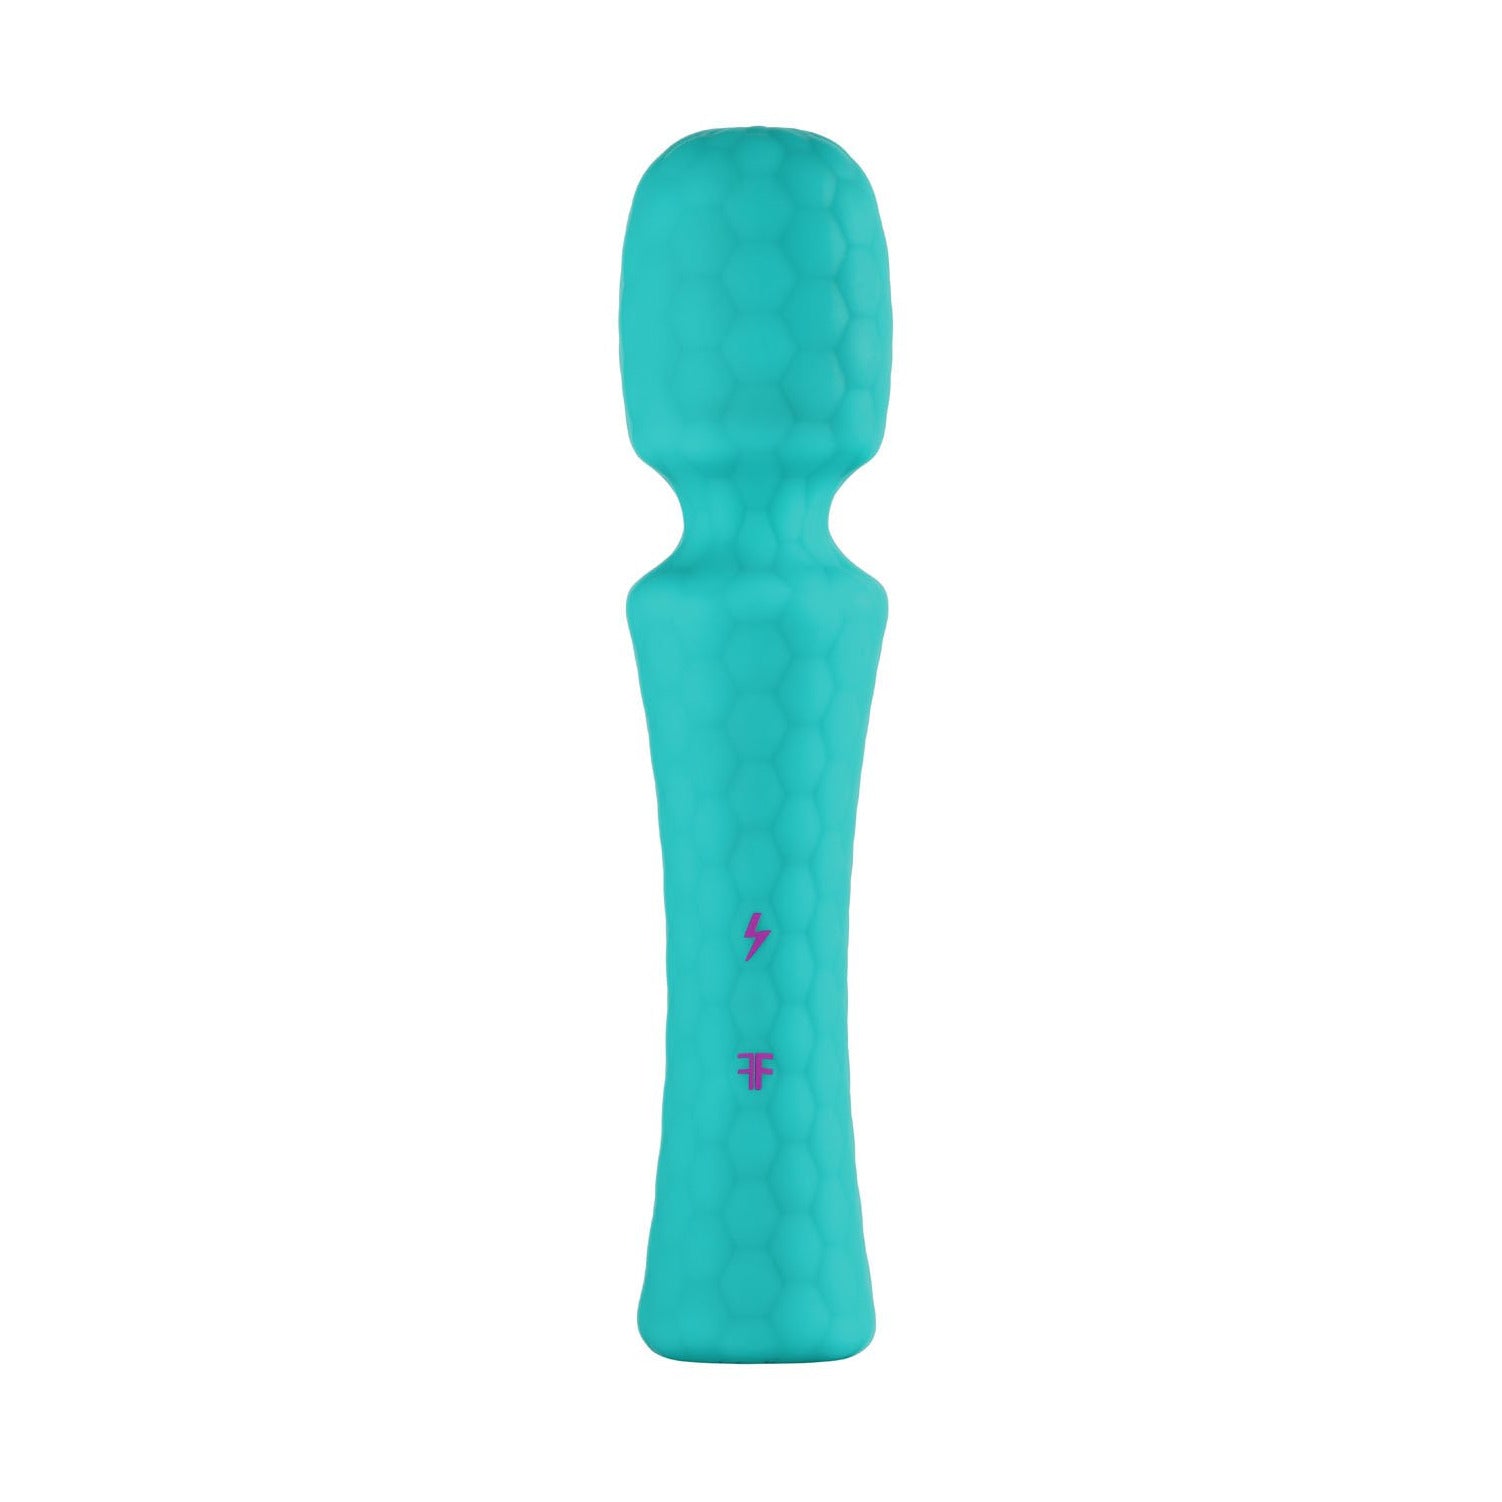 Ultra Wand in turquoise - Femme Funn - by The Bigger O - an online sex toy shop. We ship to USA, Canada and the UK.